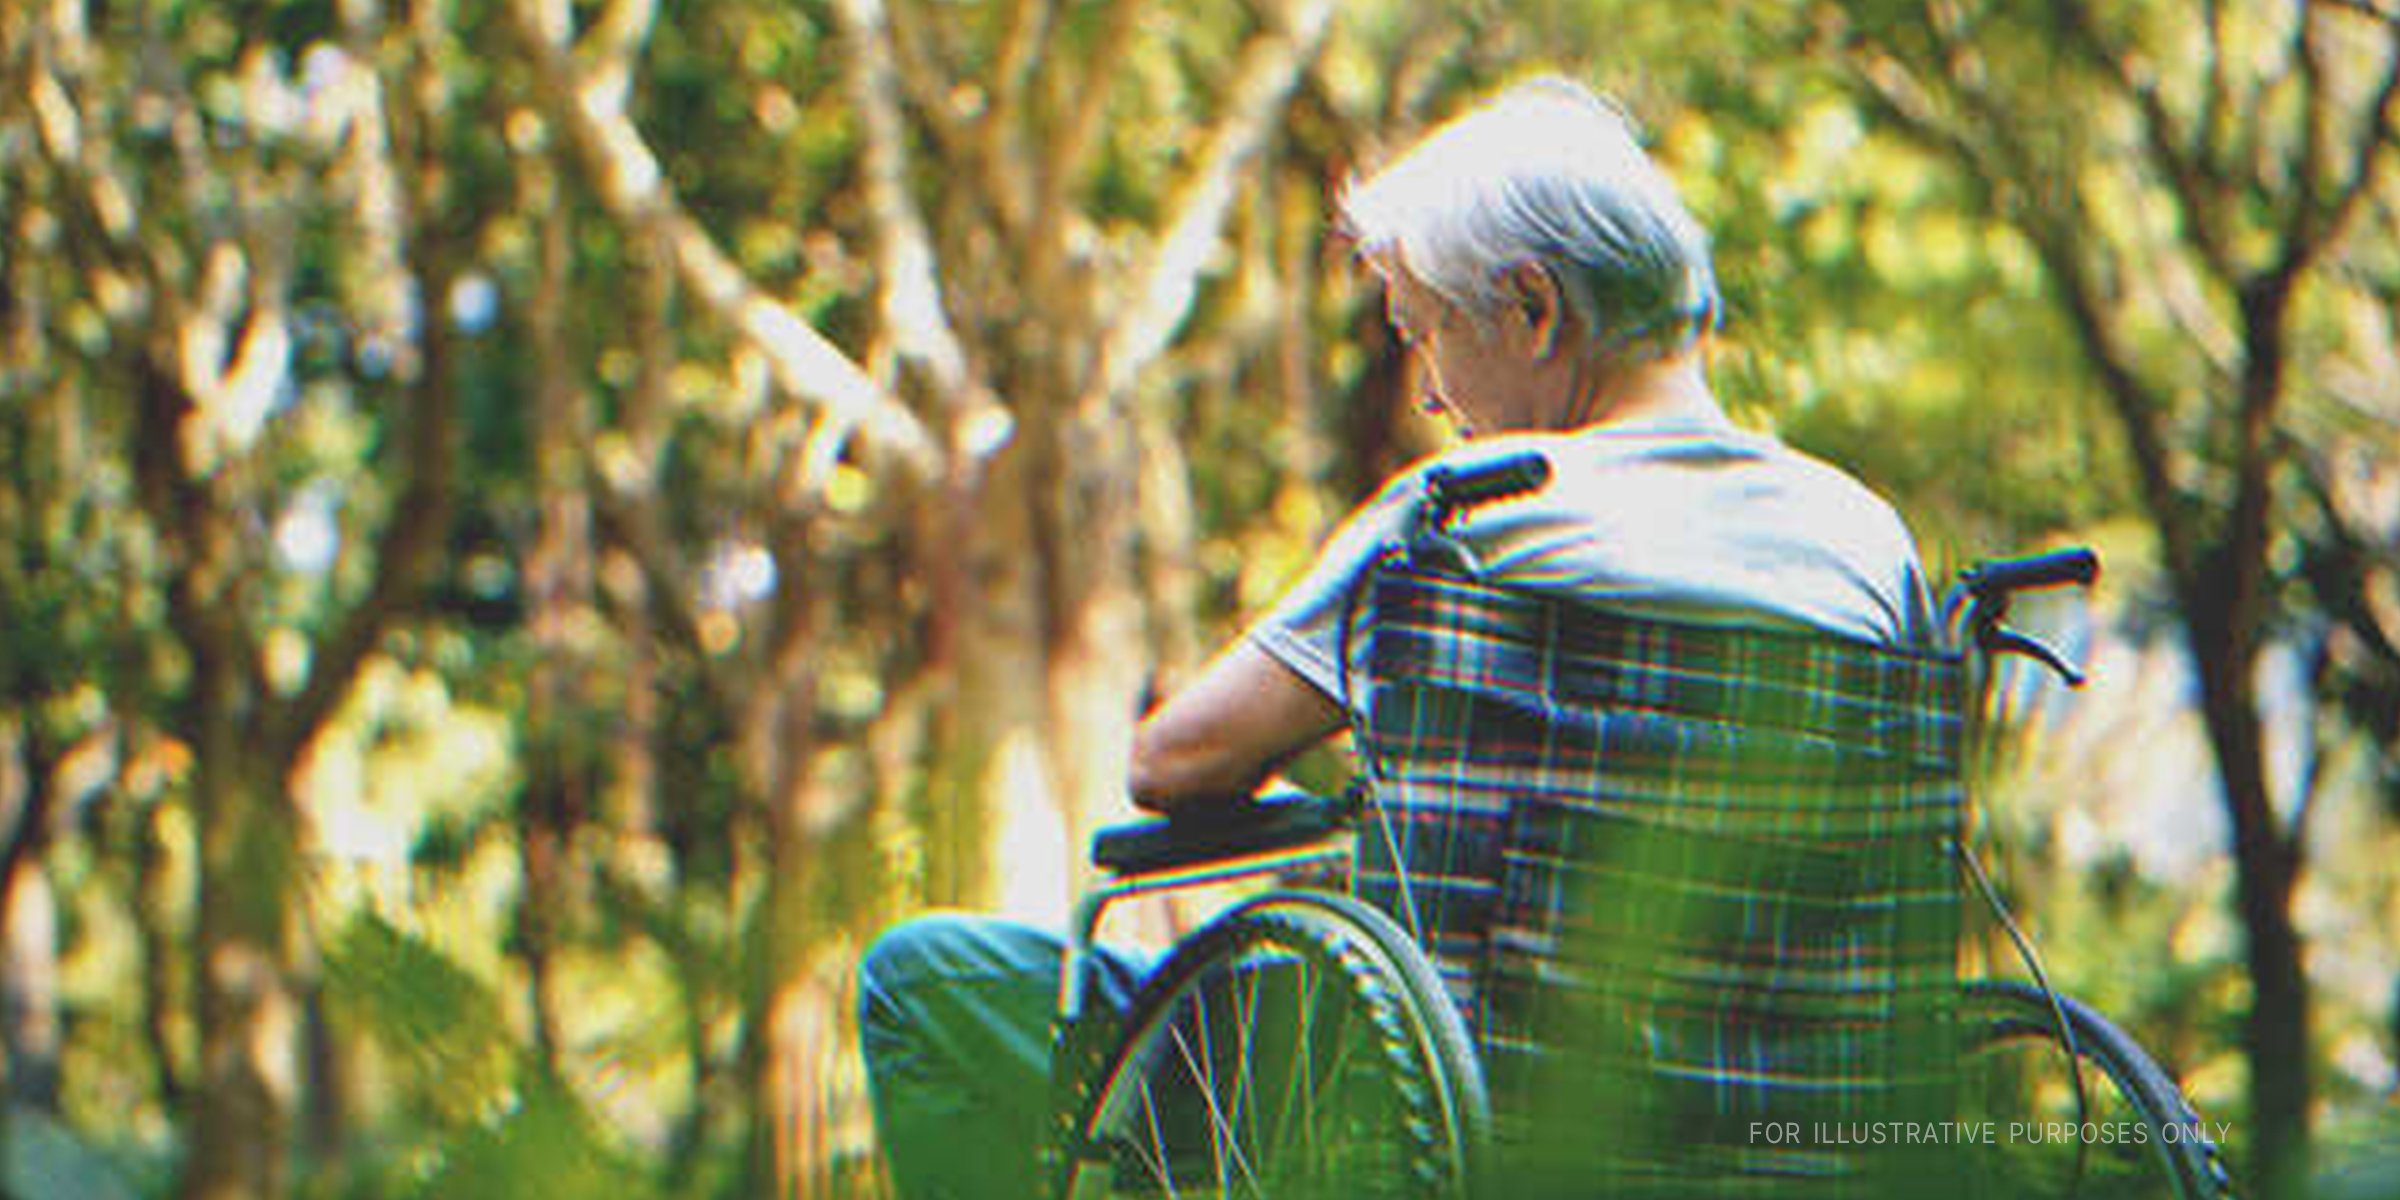 Old man sitting outdoors on a wheelchair. | Source: Shutterstock